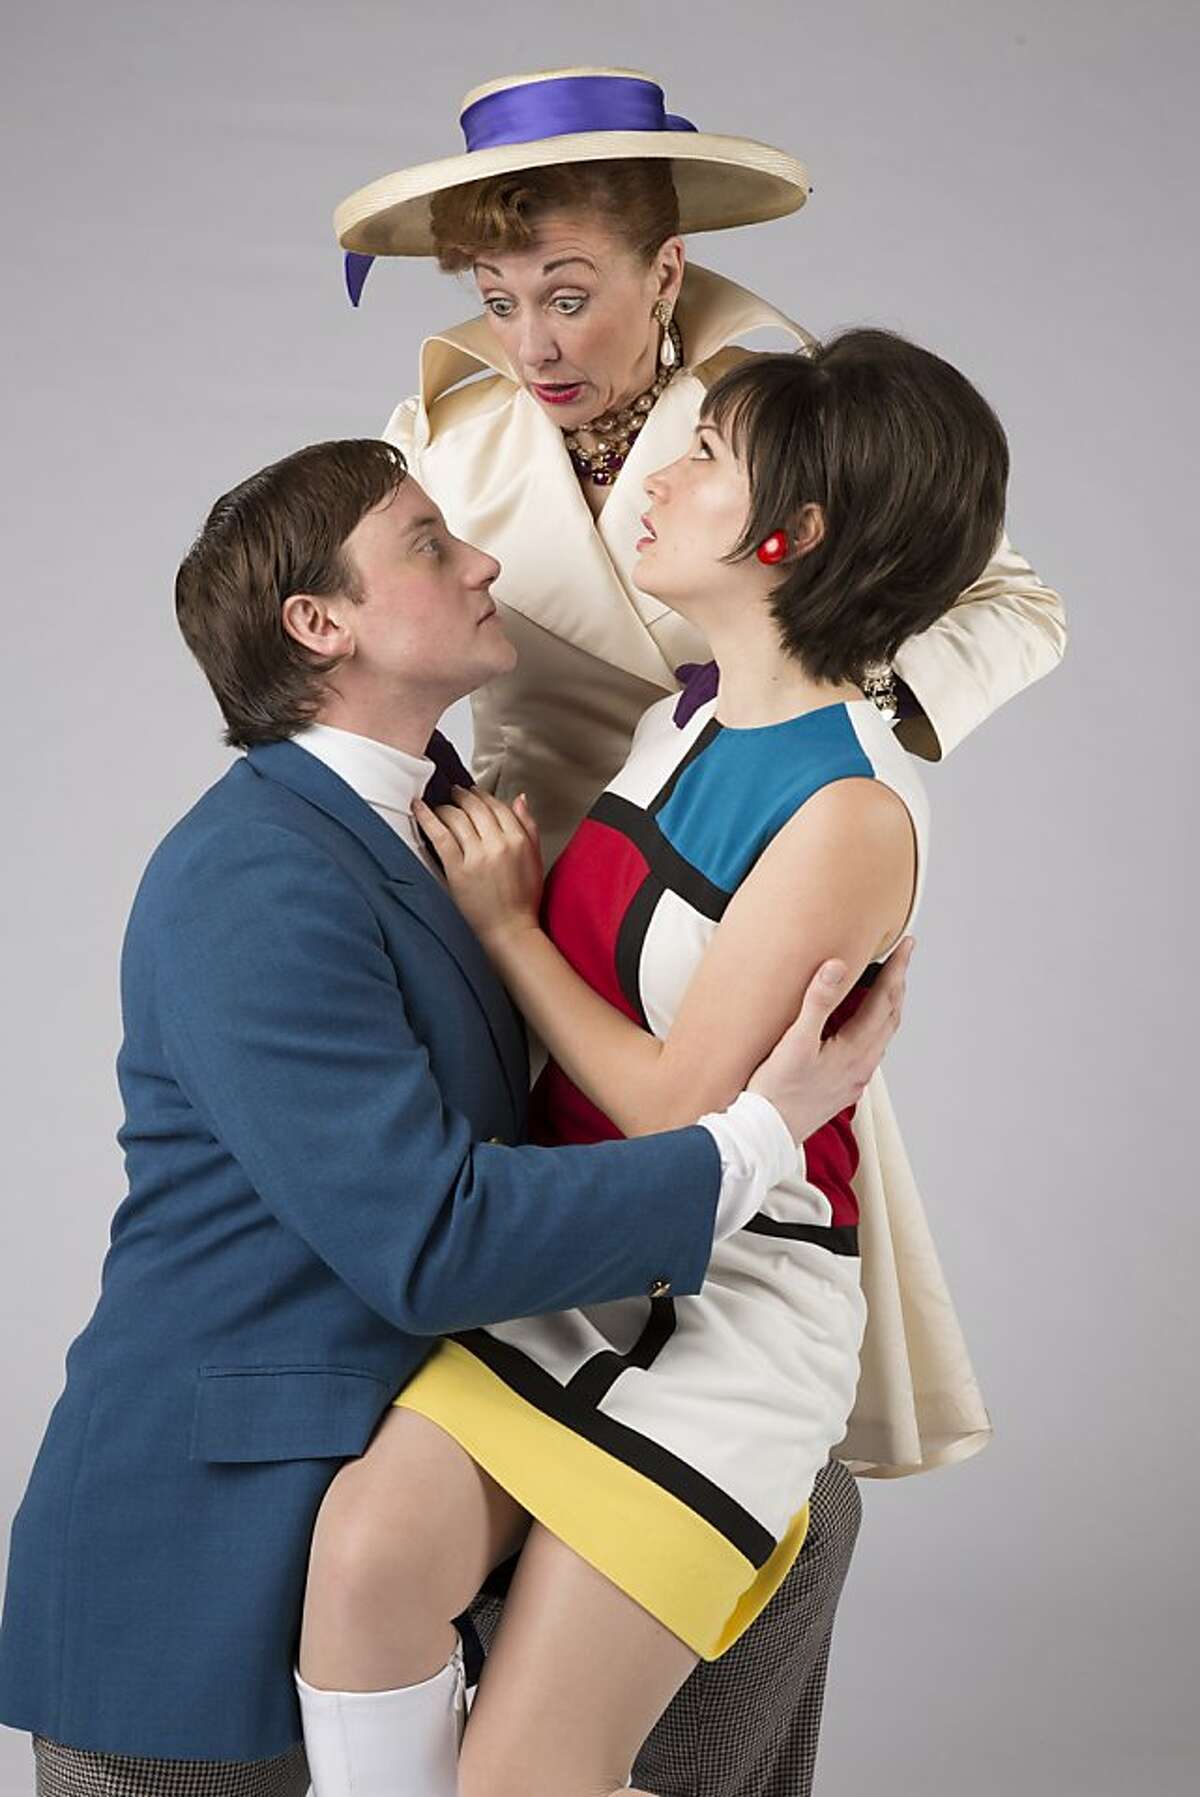 Lady Bracknell (Maureen McVerry, center) is horrified by the antics of Jack Worthing (Hayden Tee, left) and her daughter Gwendolen (Mindy Lym, right) in world-premiere musical "Being Earnest" presented by TheatreWorks April 3 - 28 at the Mountain View Center for the Performing Arts. Photo by Tracy Martin